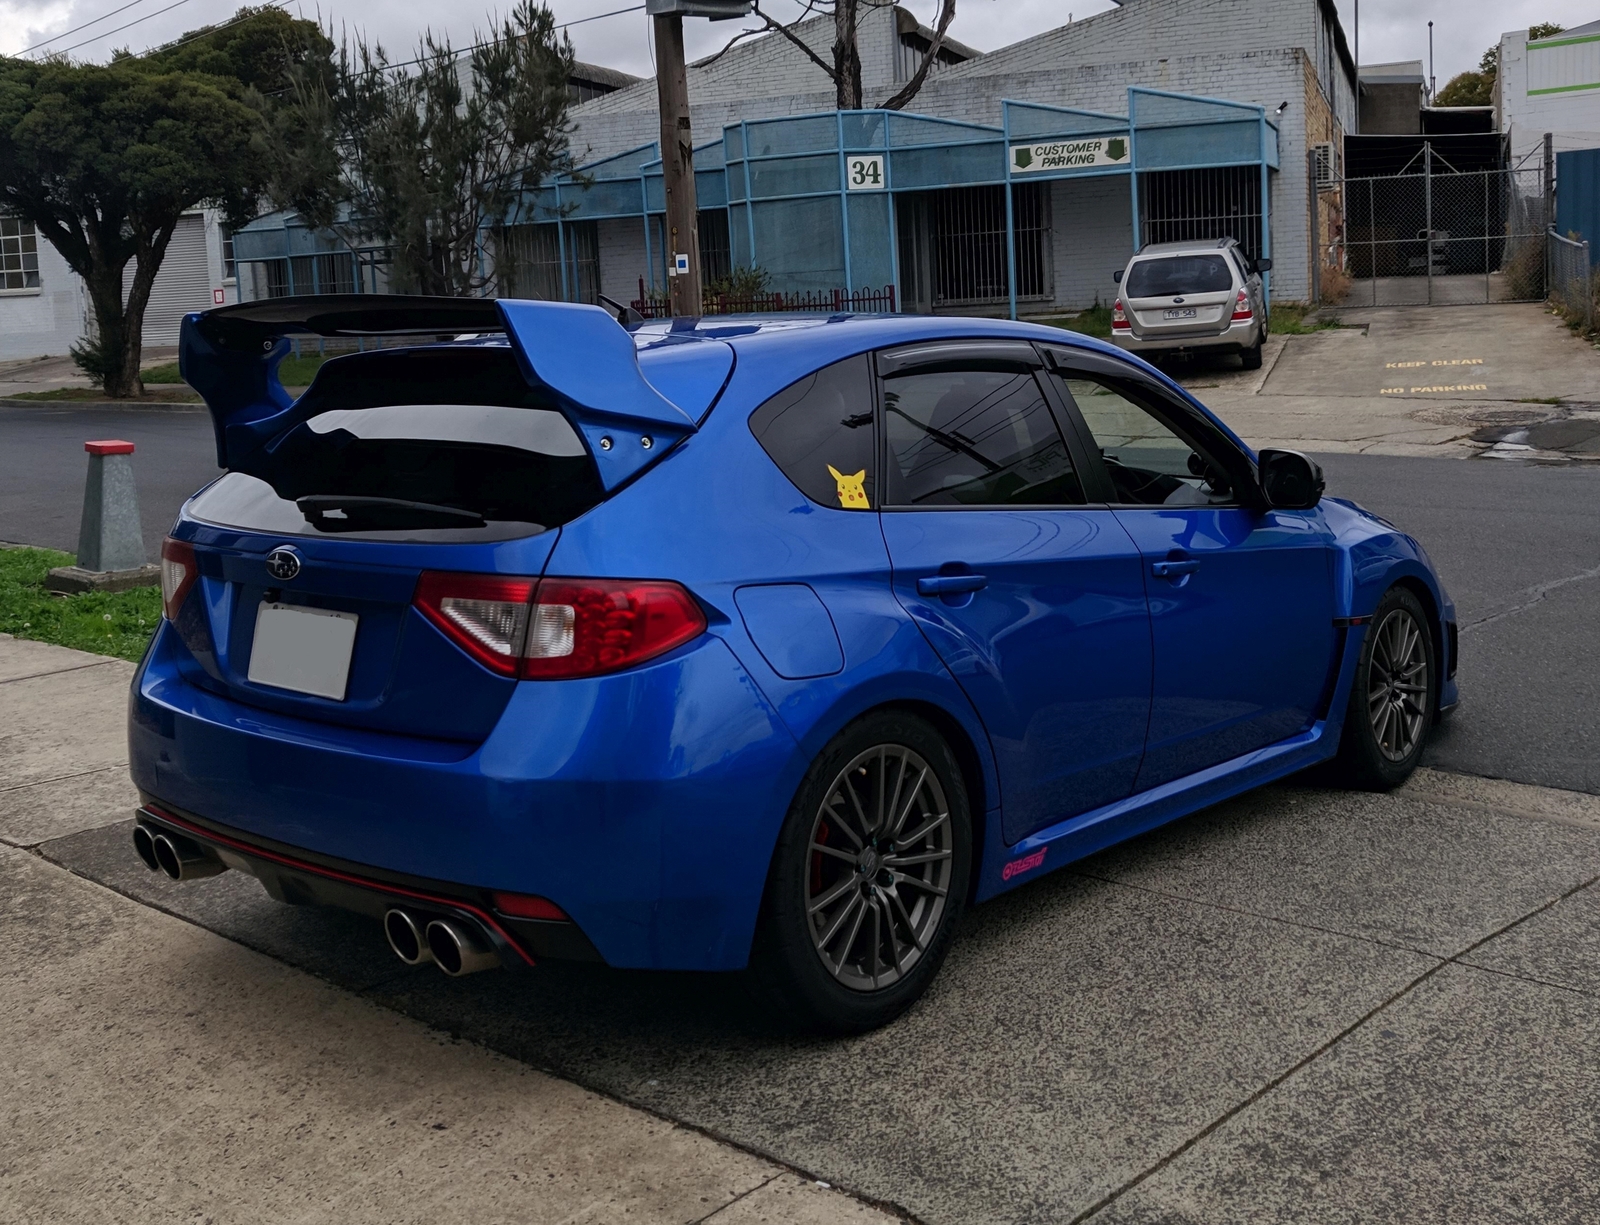 SUBARU MY0814 HATCH VARIS STYLE SPOILER WING GRB WITH CARBON